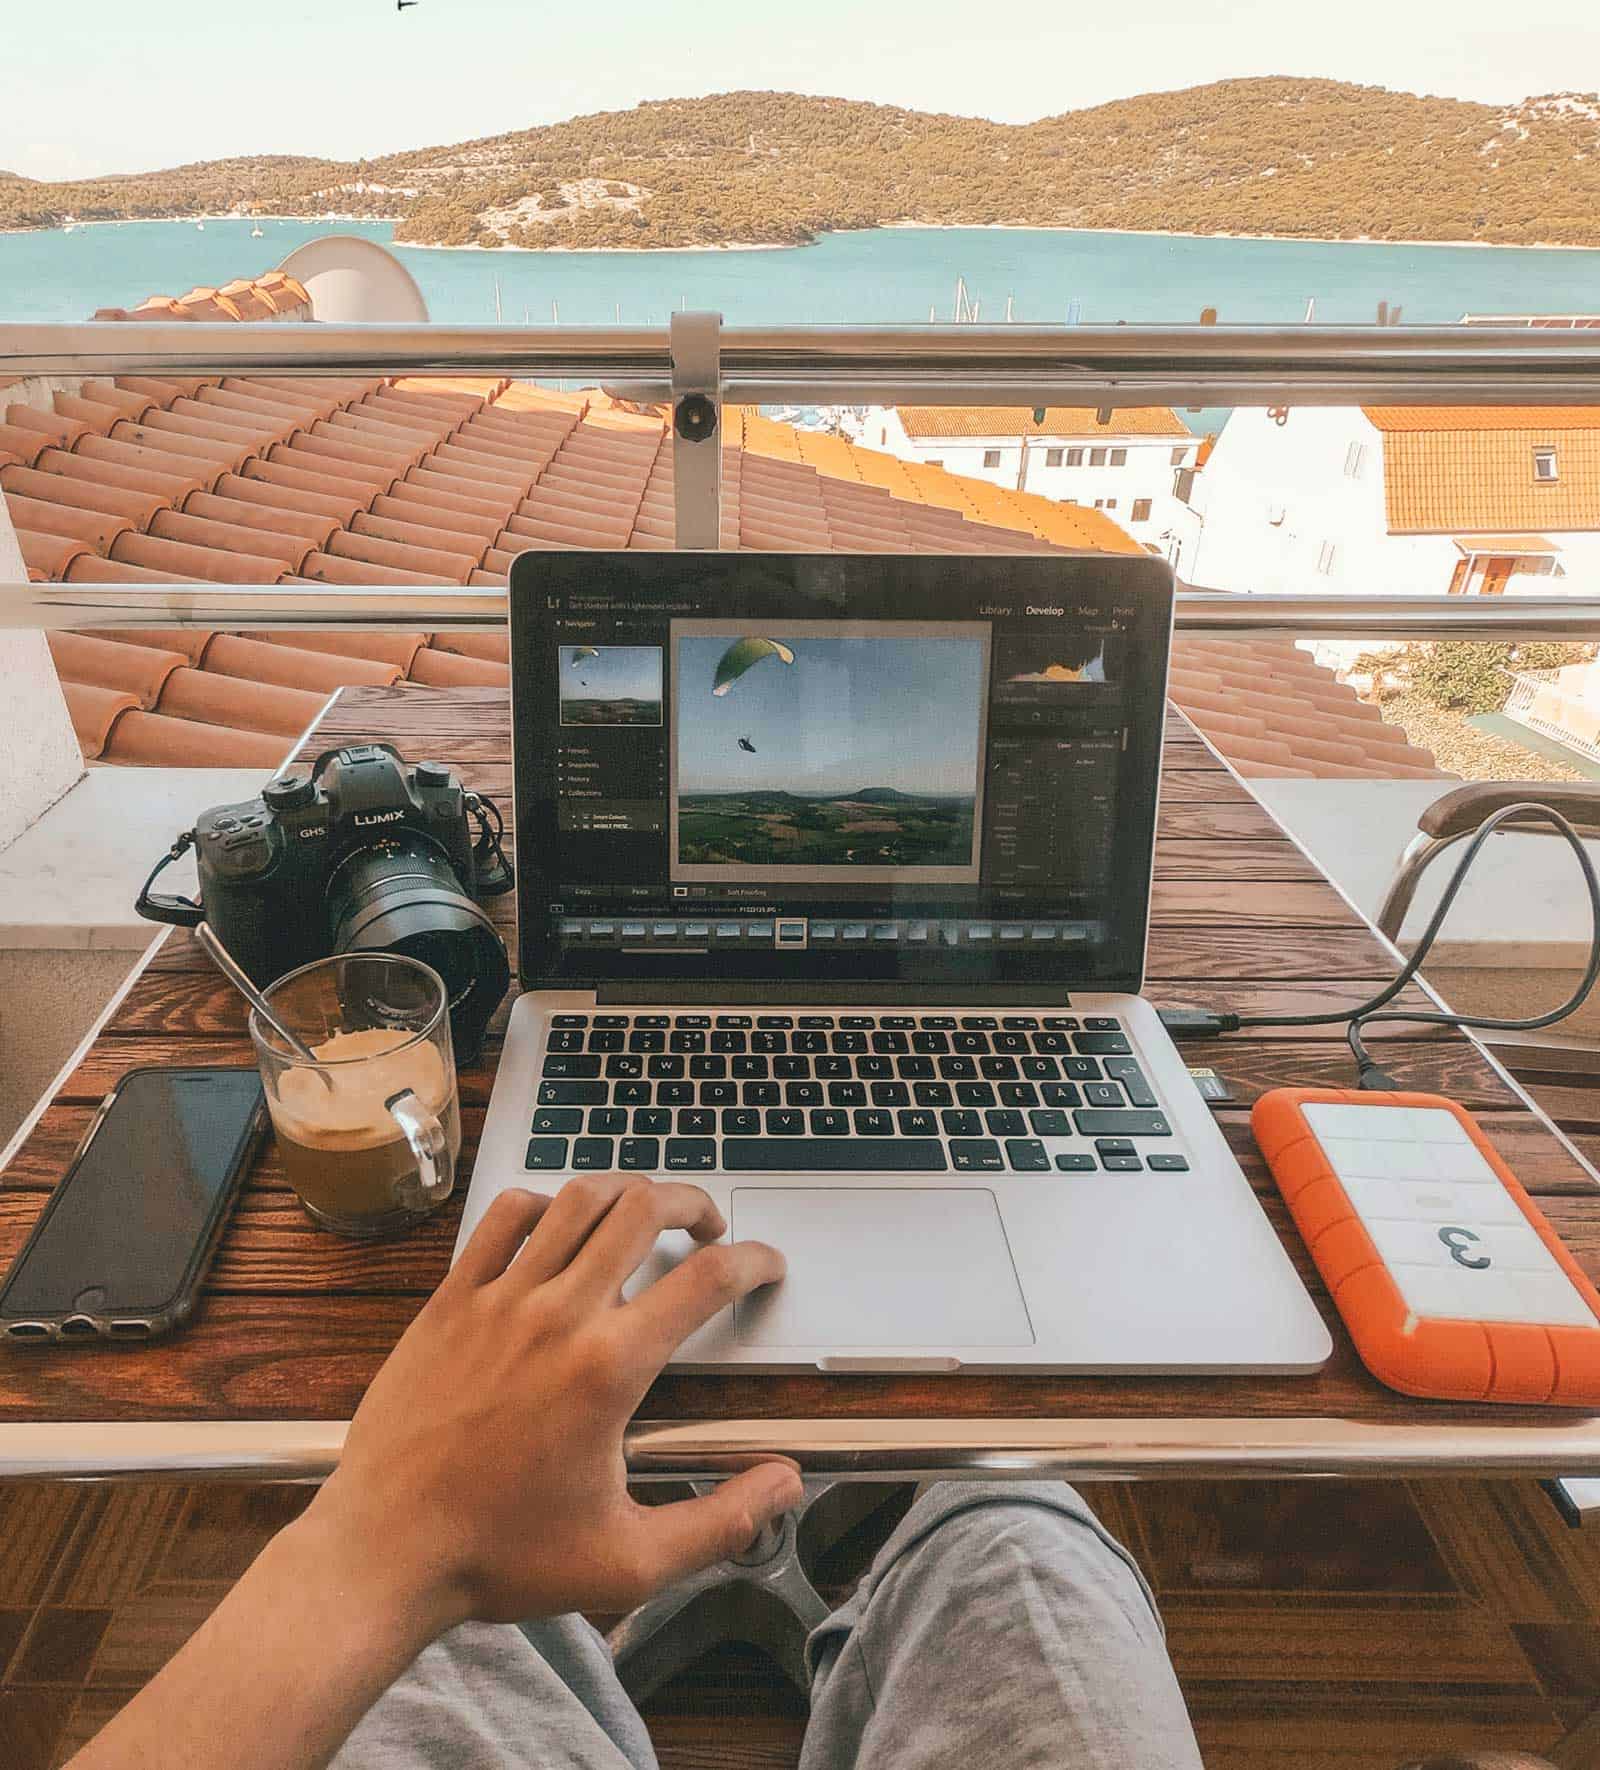 What are the benefits of a remote work trip?